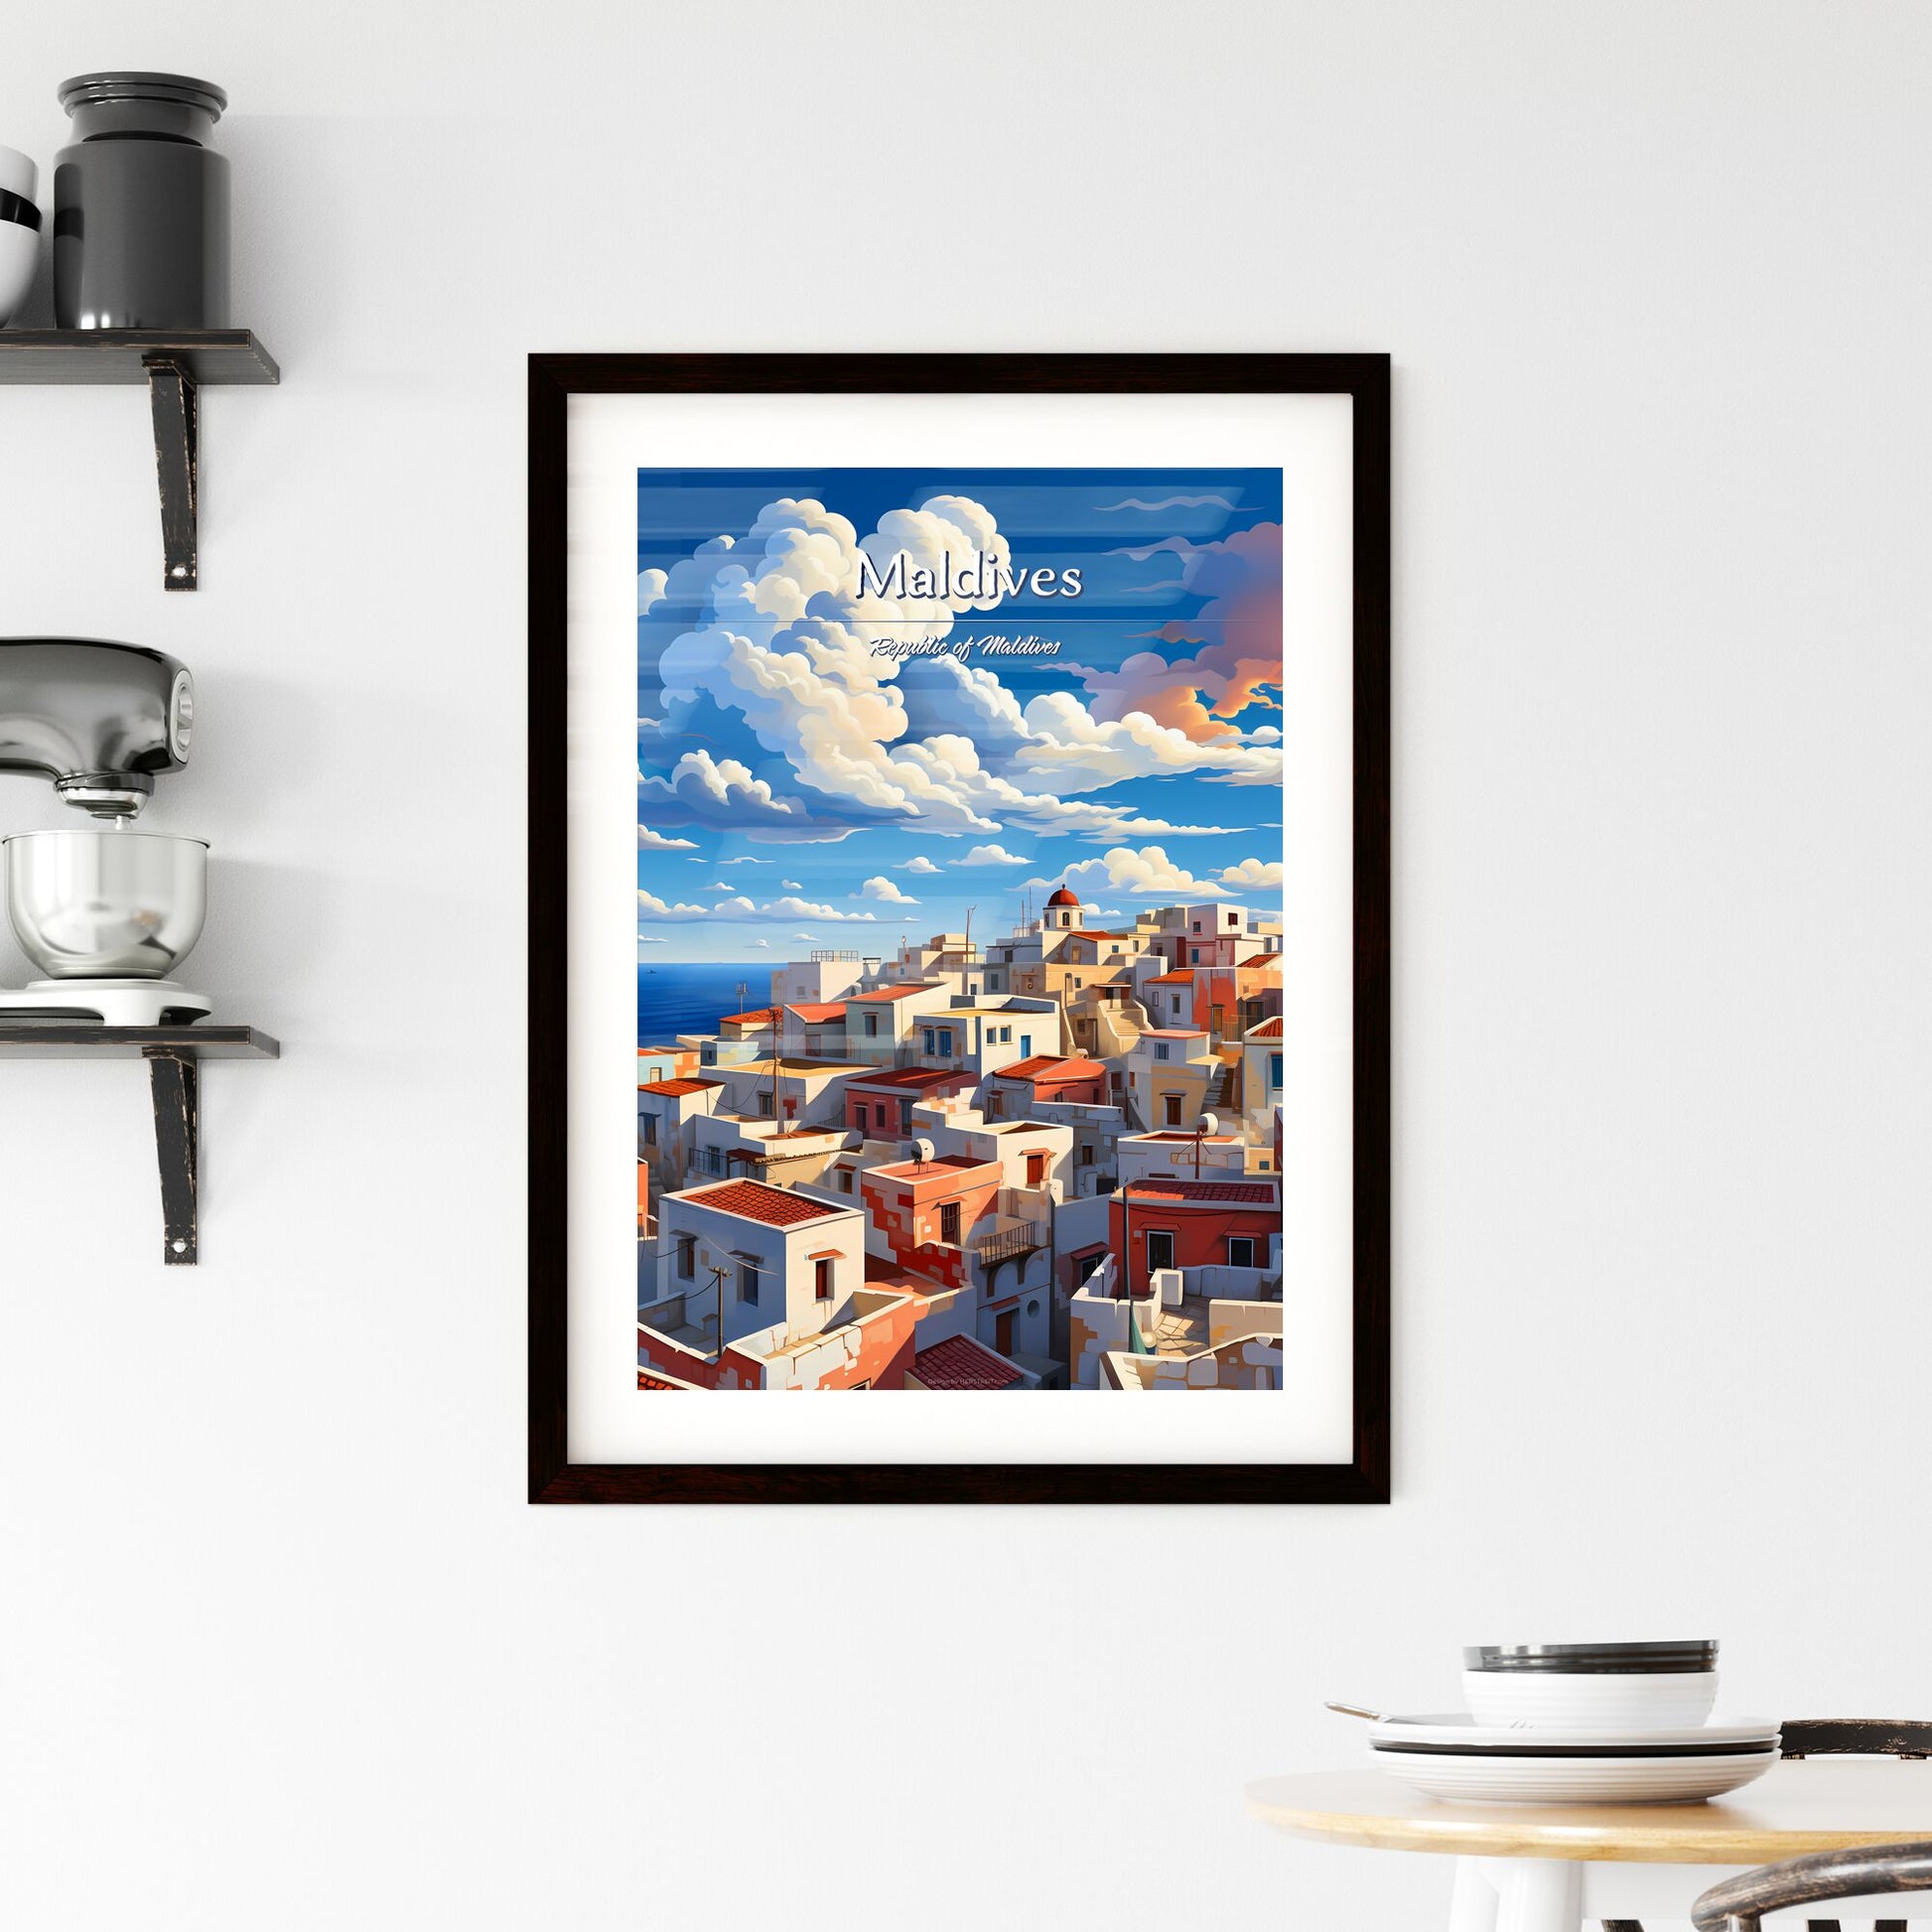 On the roofs of Maldives, Republic of Maldives - Art print of a group of buildings with red roofs and blue sky with clouds Default Title